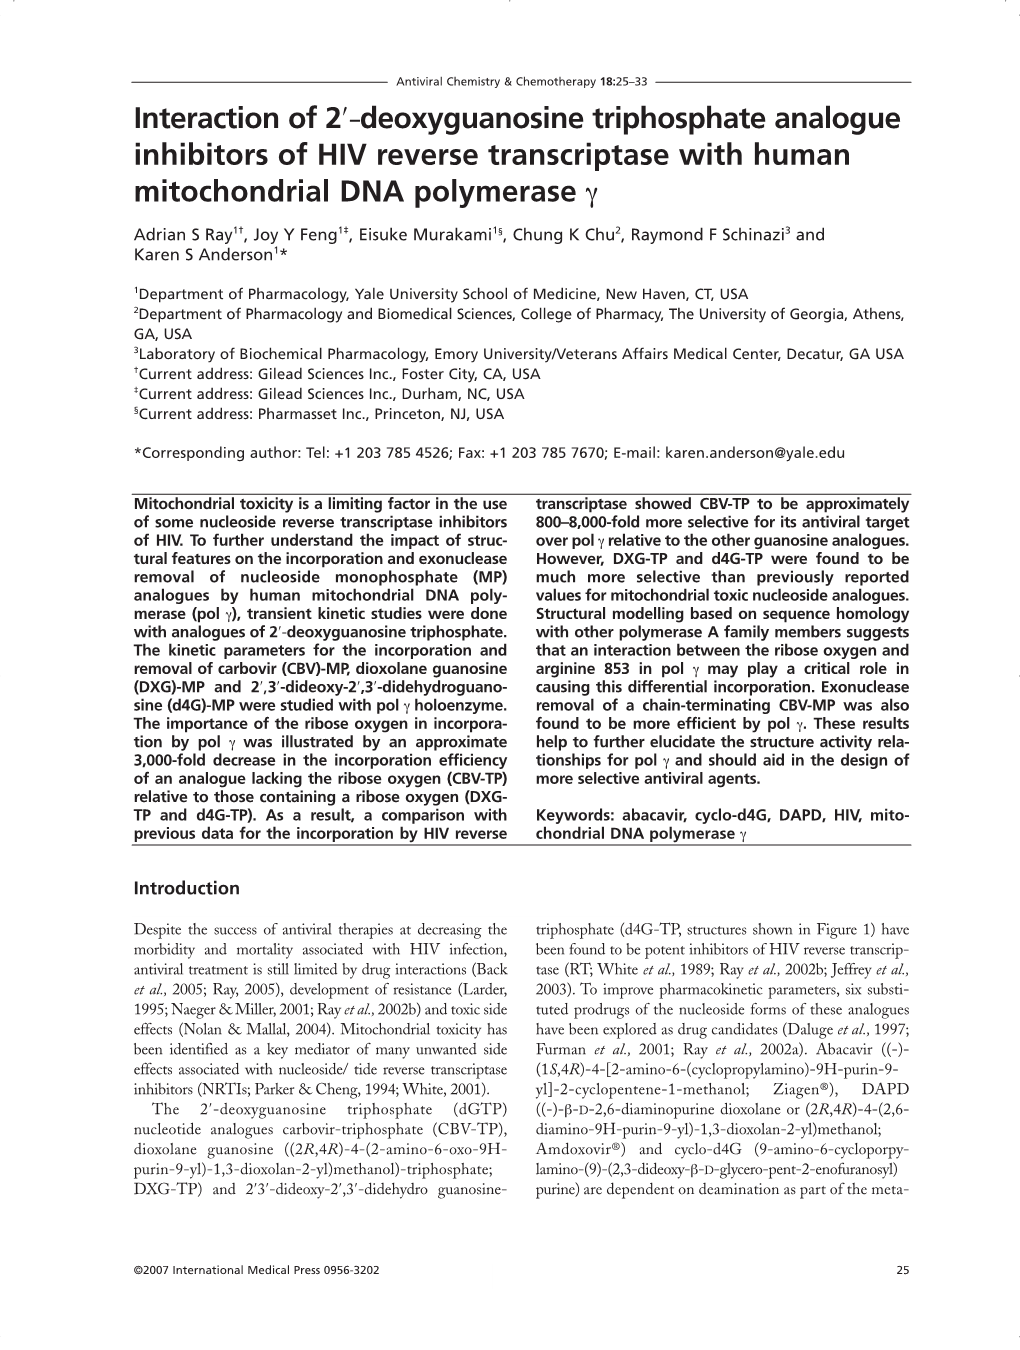 Deoxyguanosine Triphosphate Analogue Inhibitors of HIV Reverse Transcriptase with Human Mitochondrial DNA Polymerase Γ